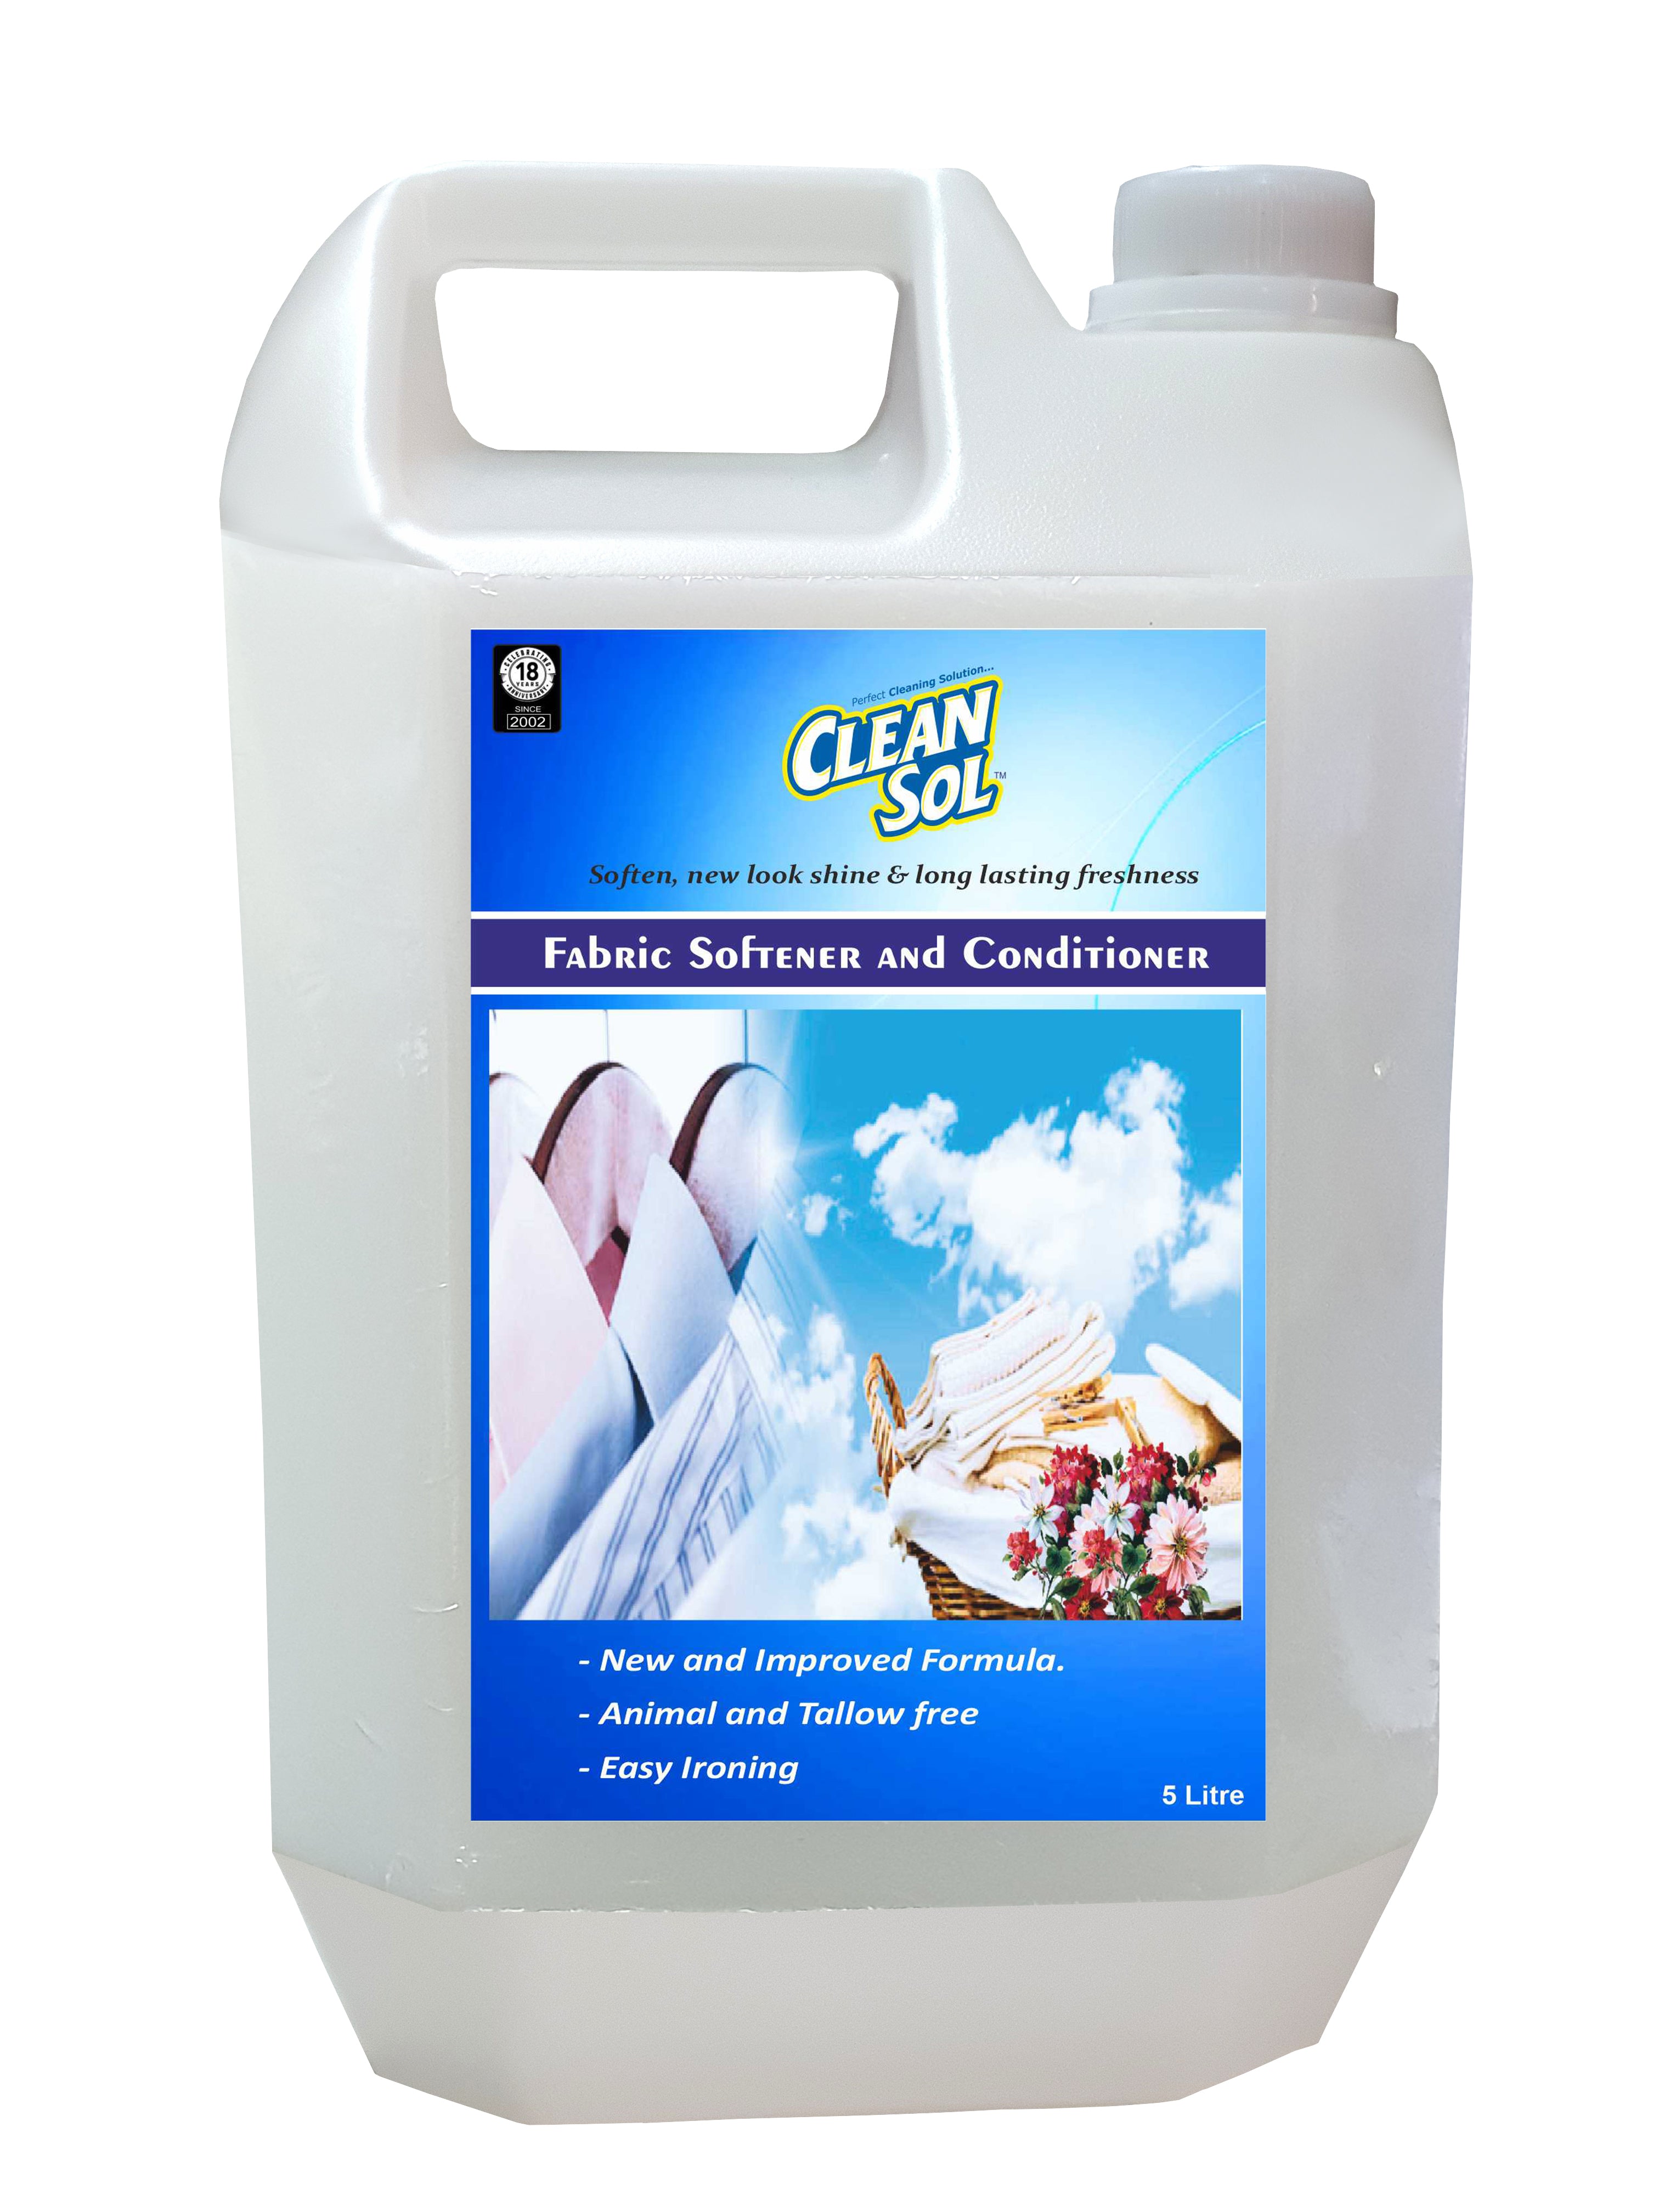 Cleansol Fabric Softener and Conditioner for Cloth After Wash – 5 Litre